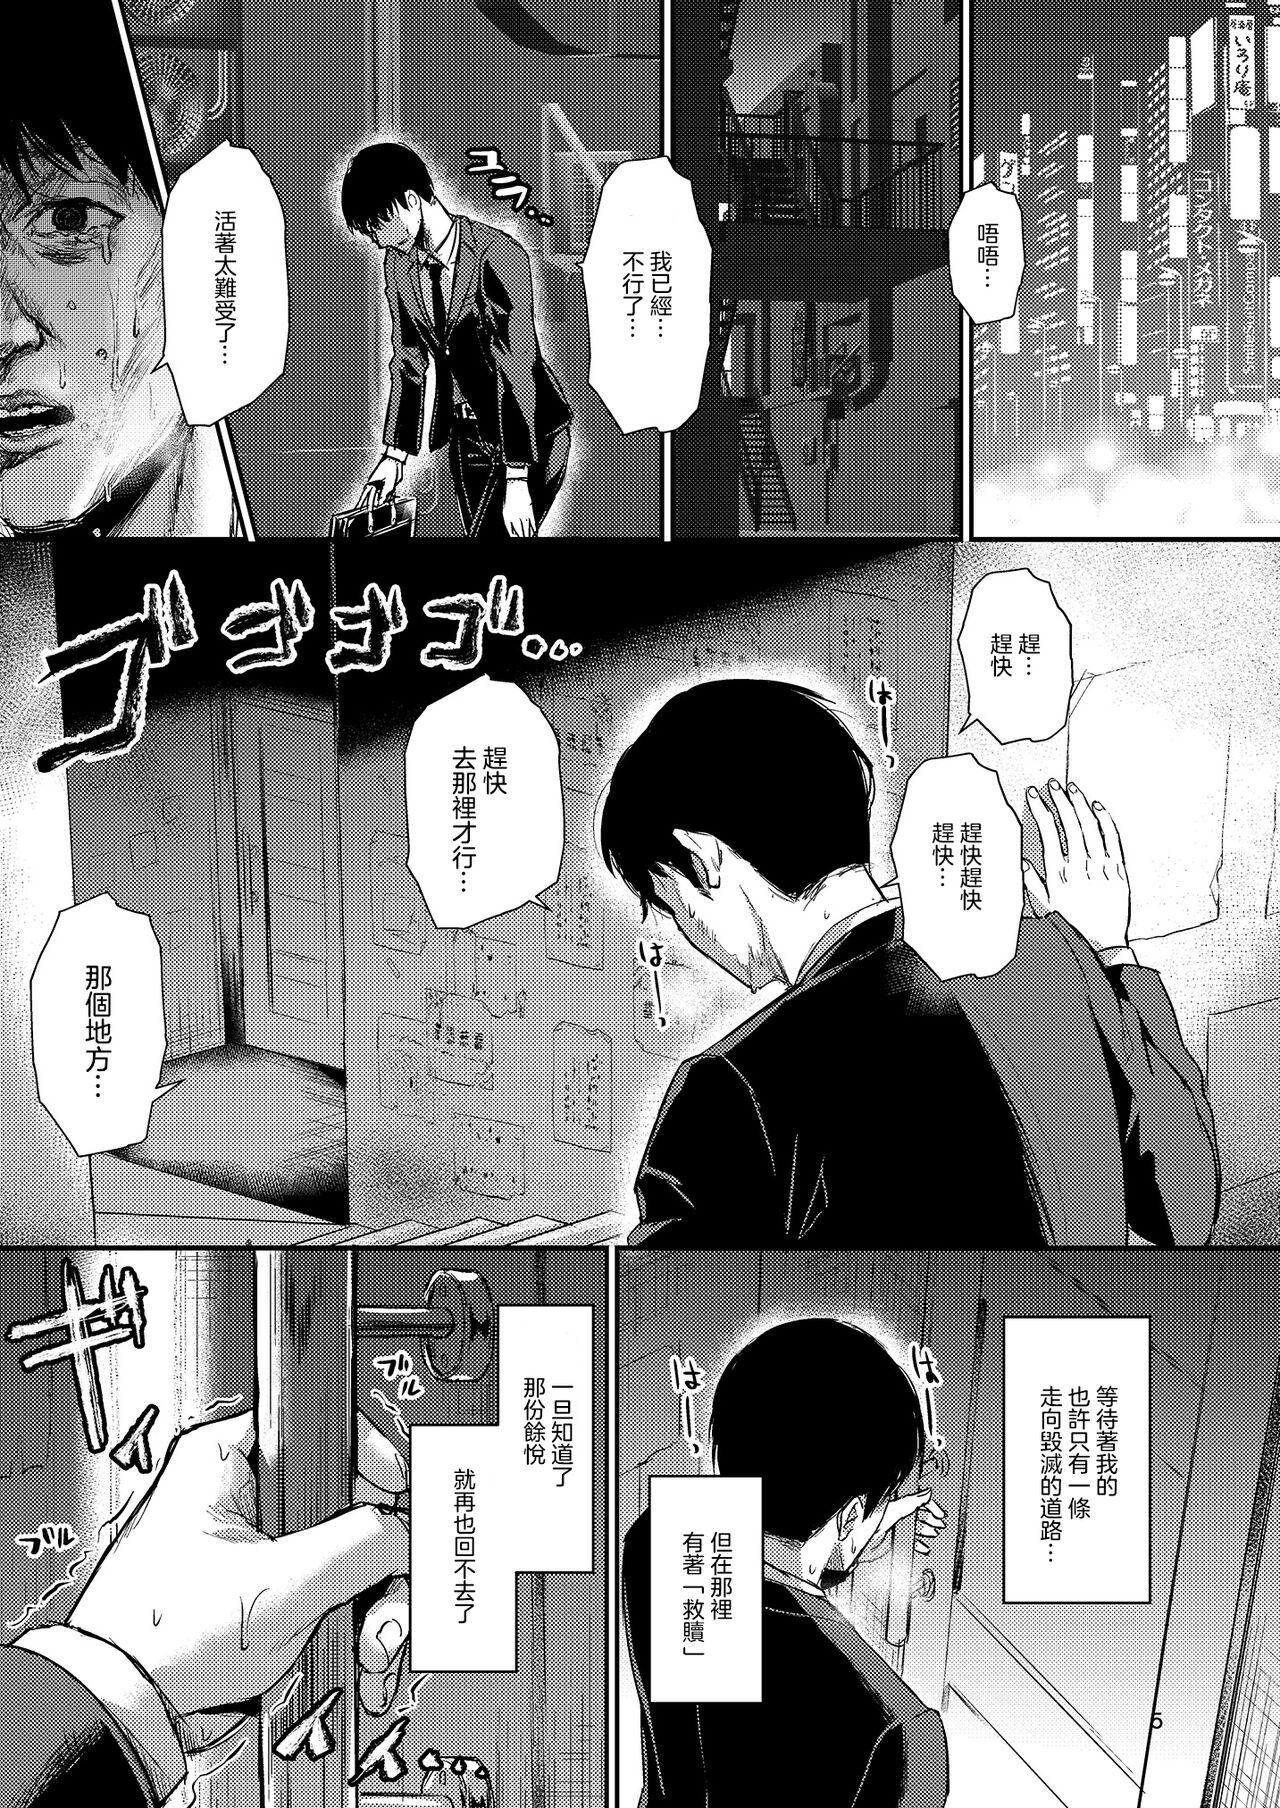 Amature Sex Homehome Home e Youkoso! - Welcome to Home Home Home! | 歡迎來到誇誇屋！ Twinks - Page 6